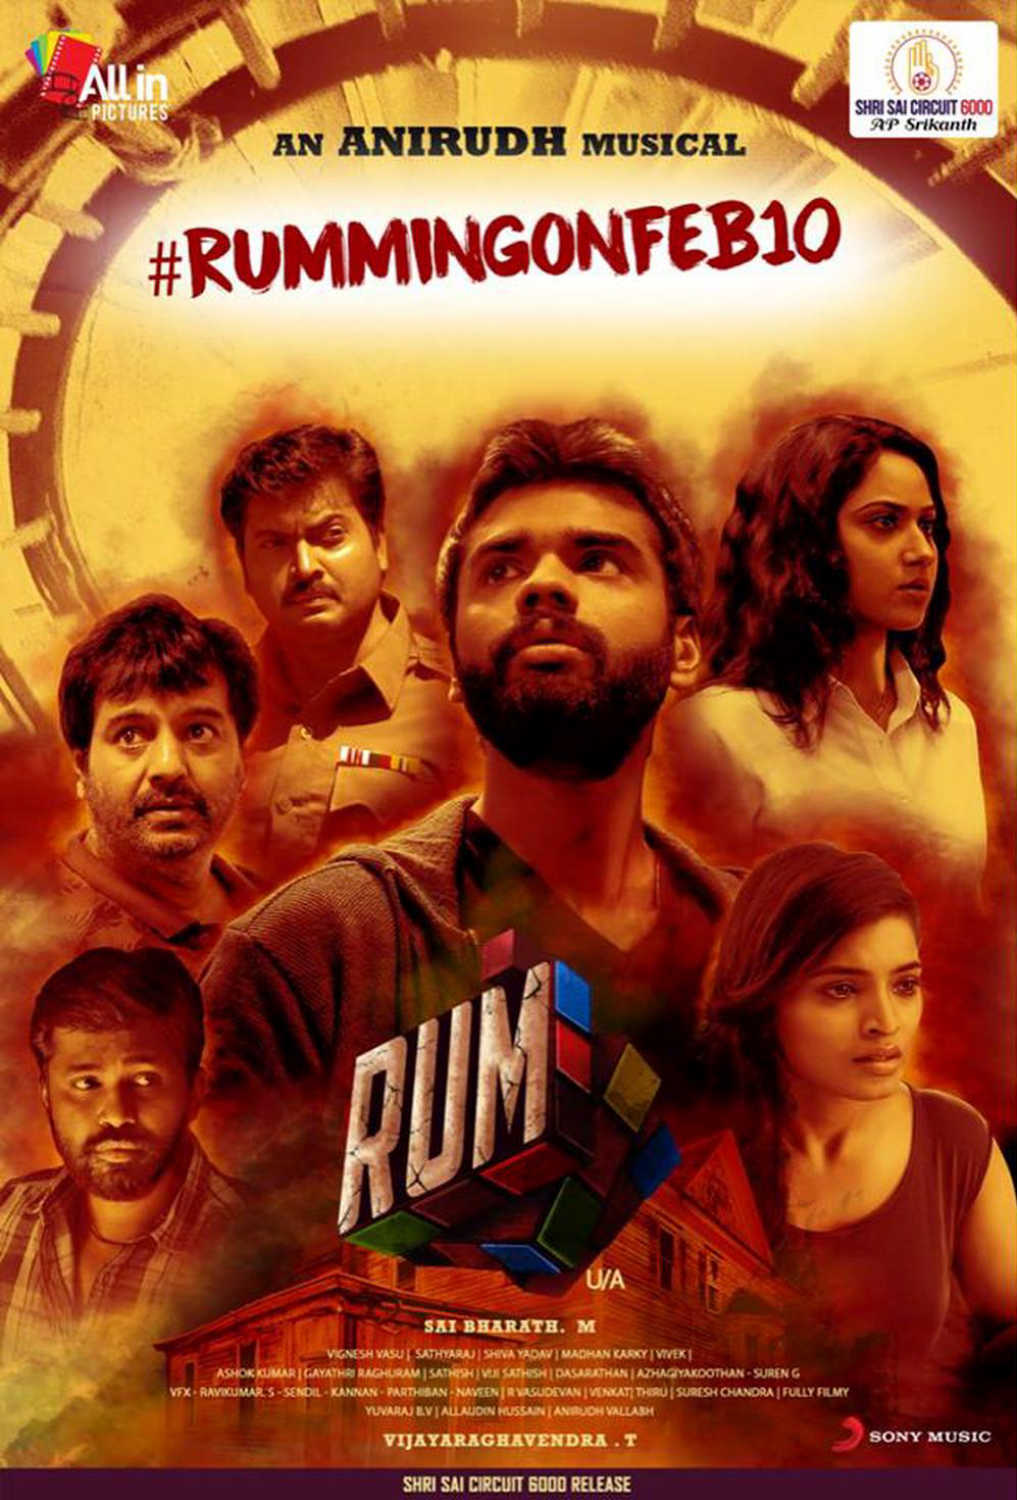 Poster for the movie "Rum"